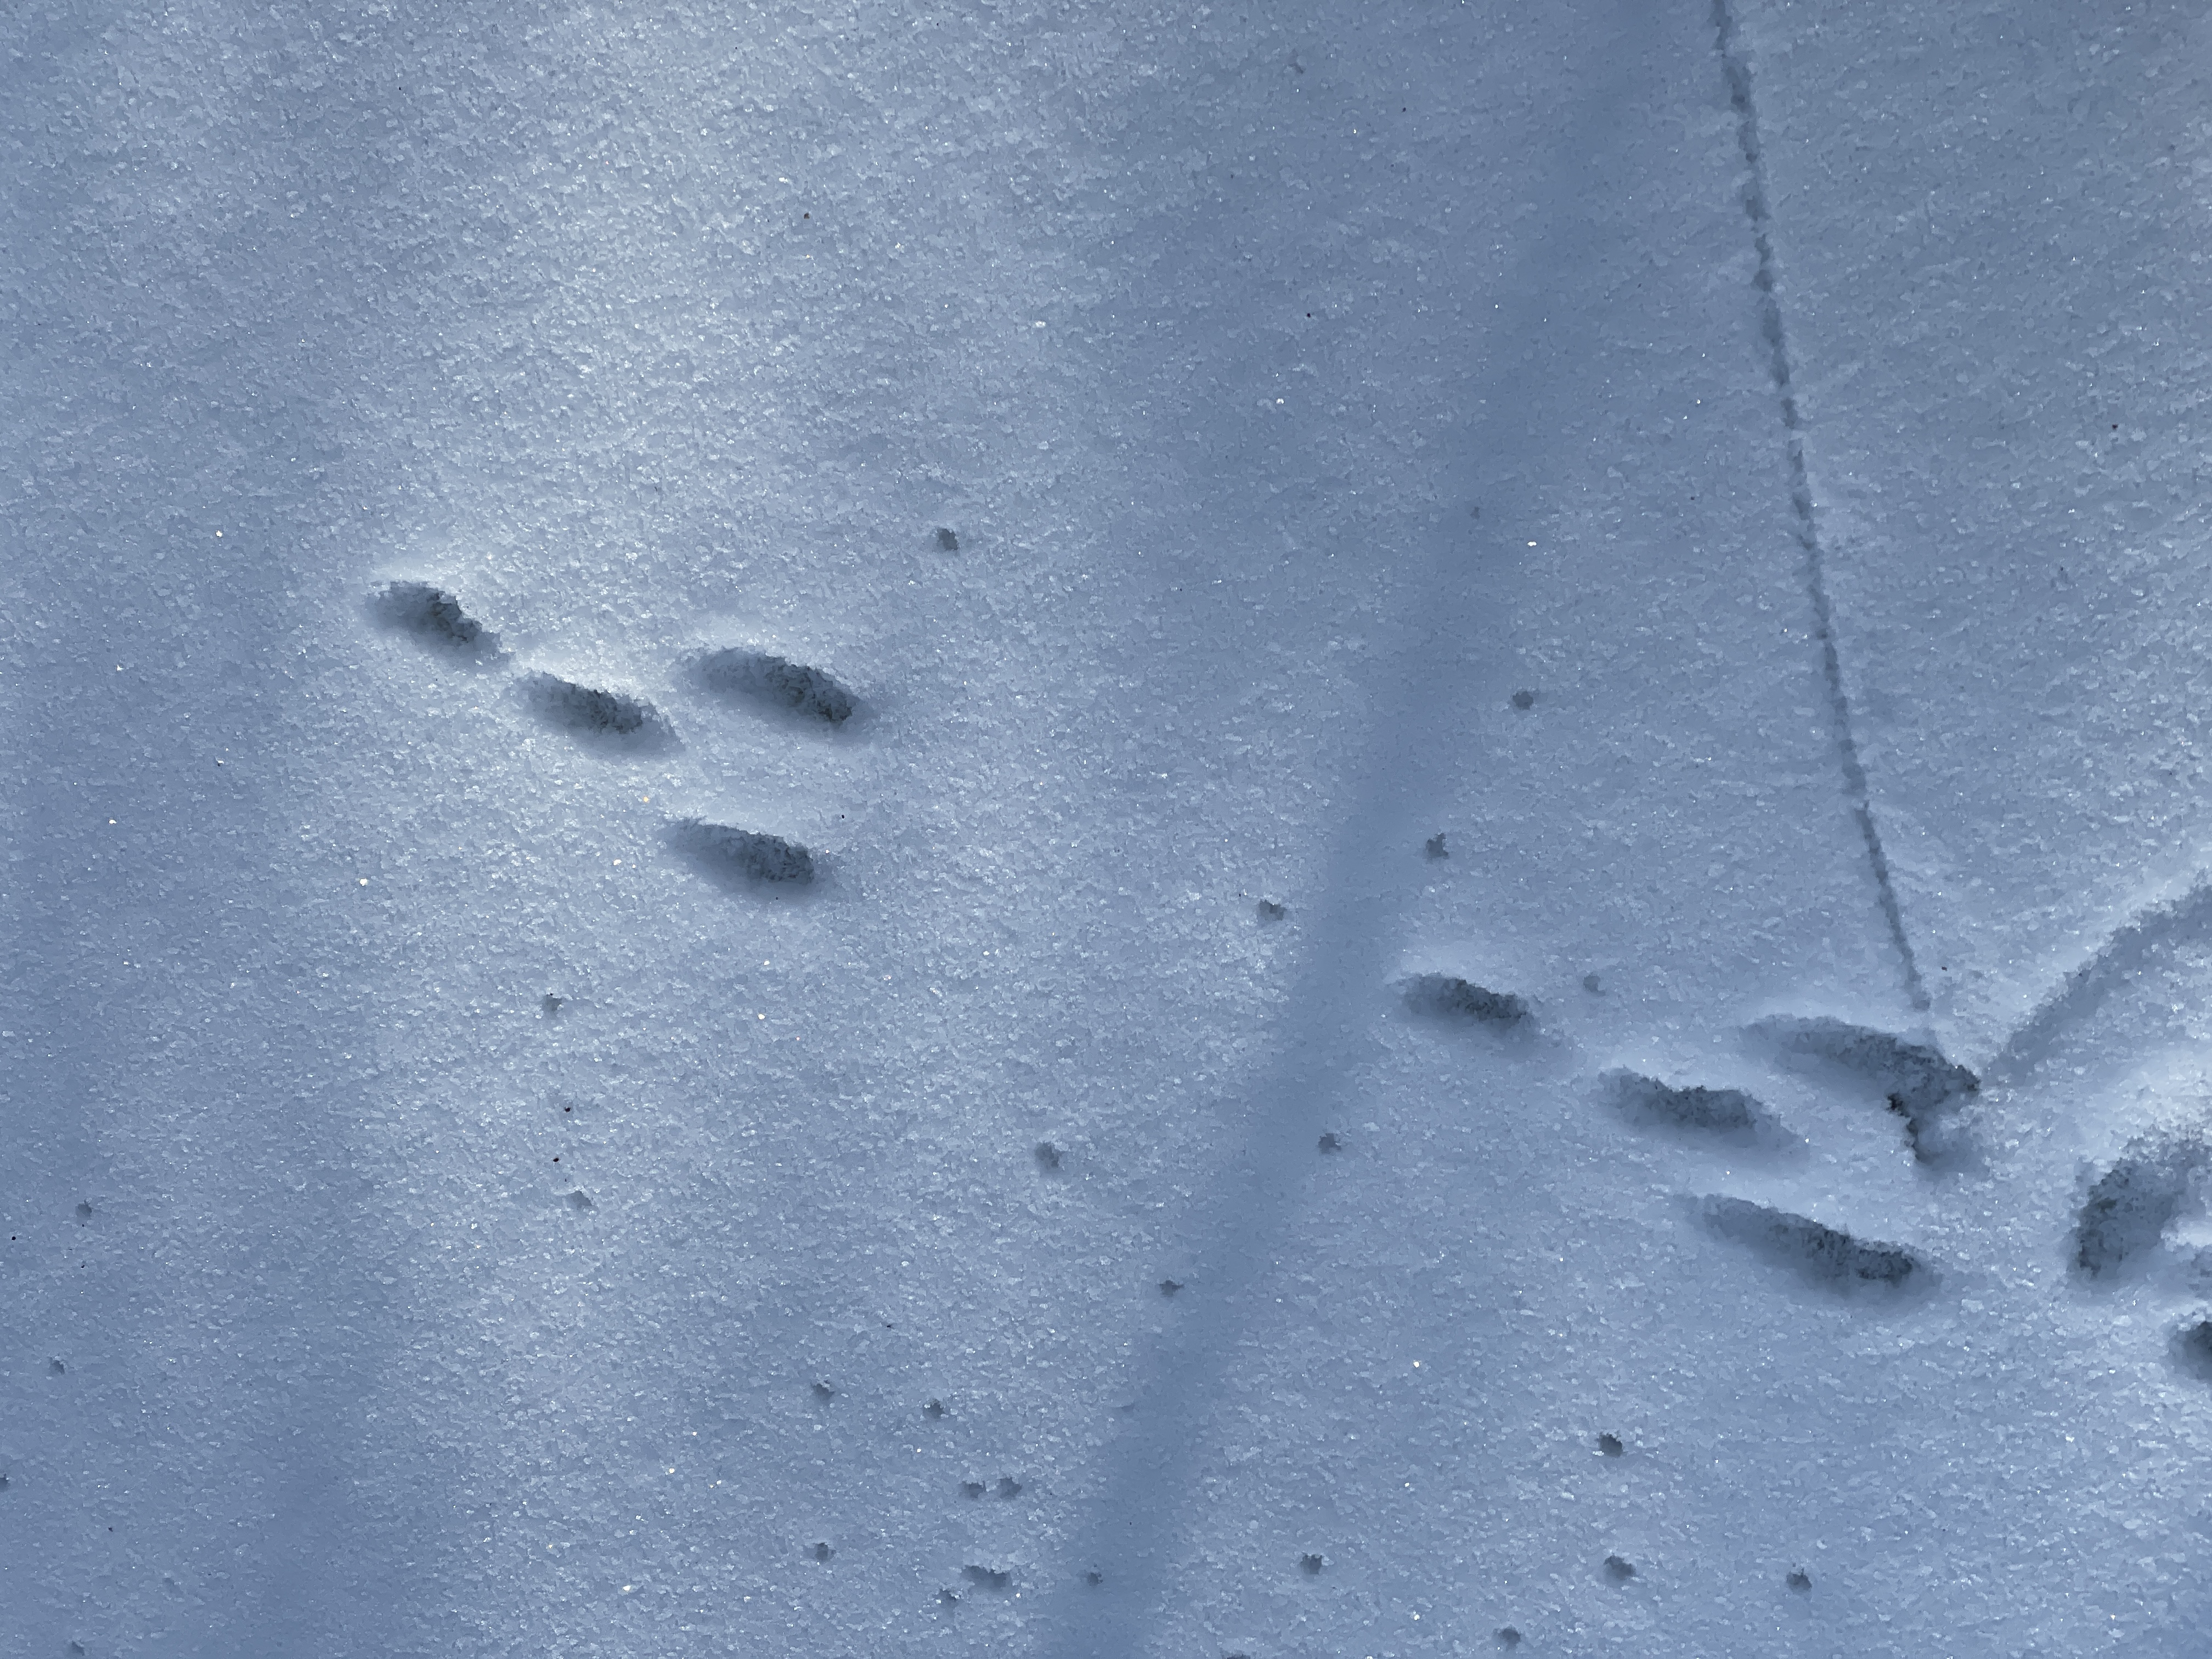 Rabbit tracks in the snow leading to a den.